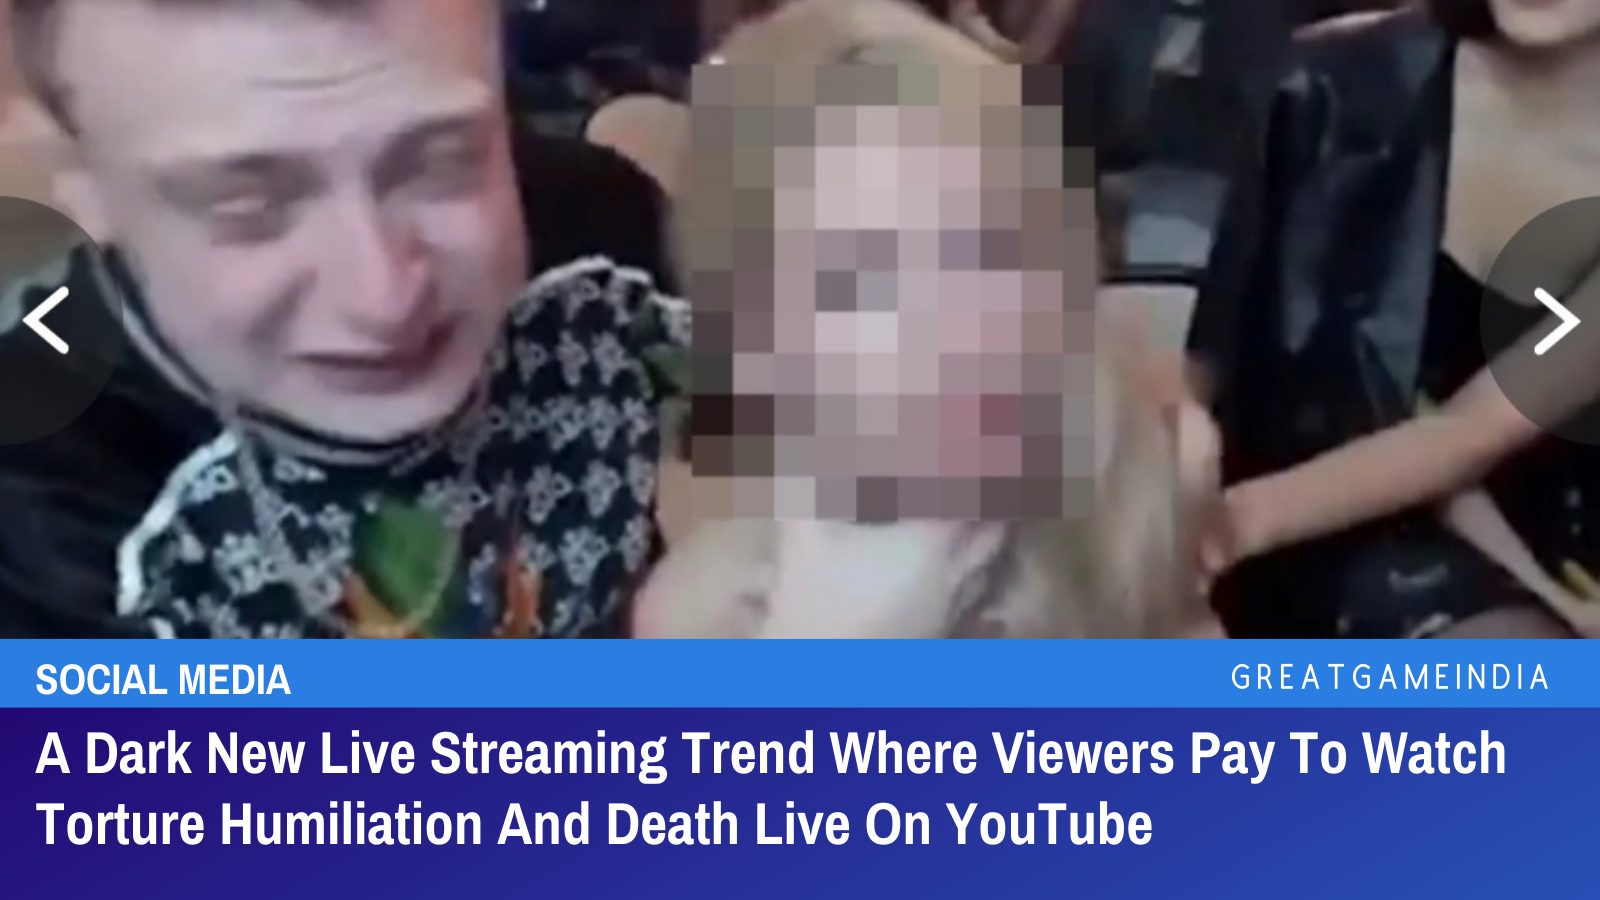 A Dark New Live Streaming Trend Where Viewers Pay To Watch Torture Humiliation And Death Live On YouTube